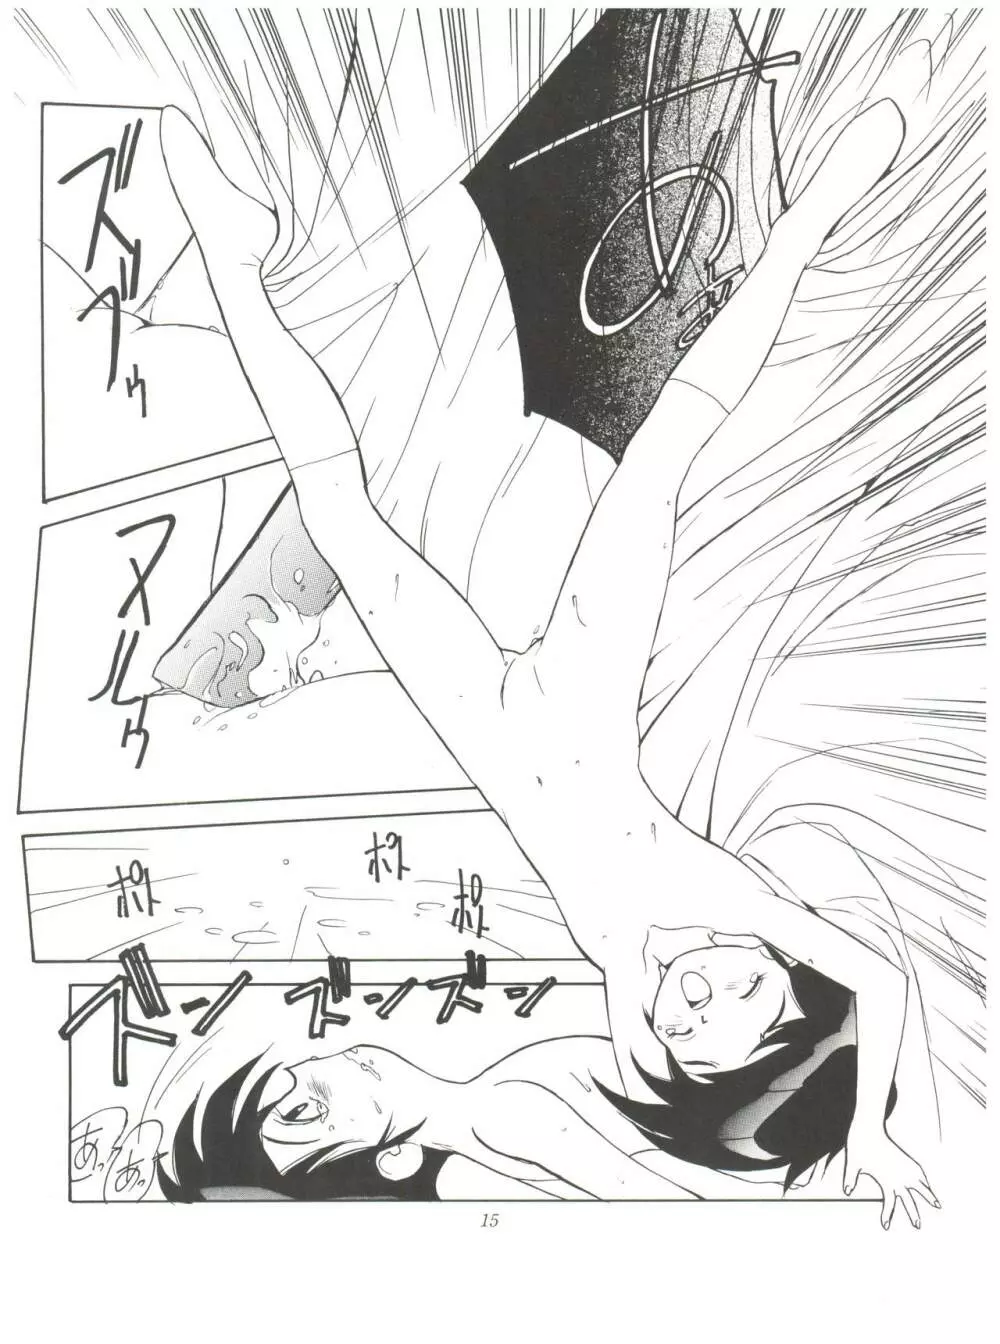 FLY! ISAMI!! - page19